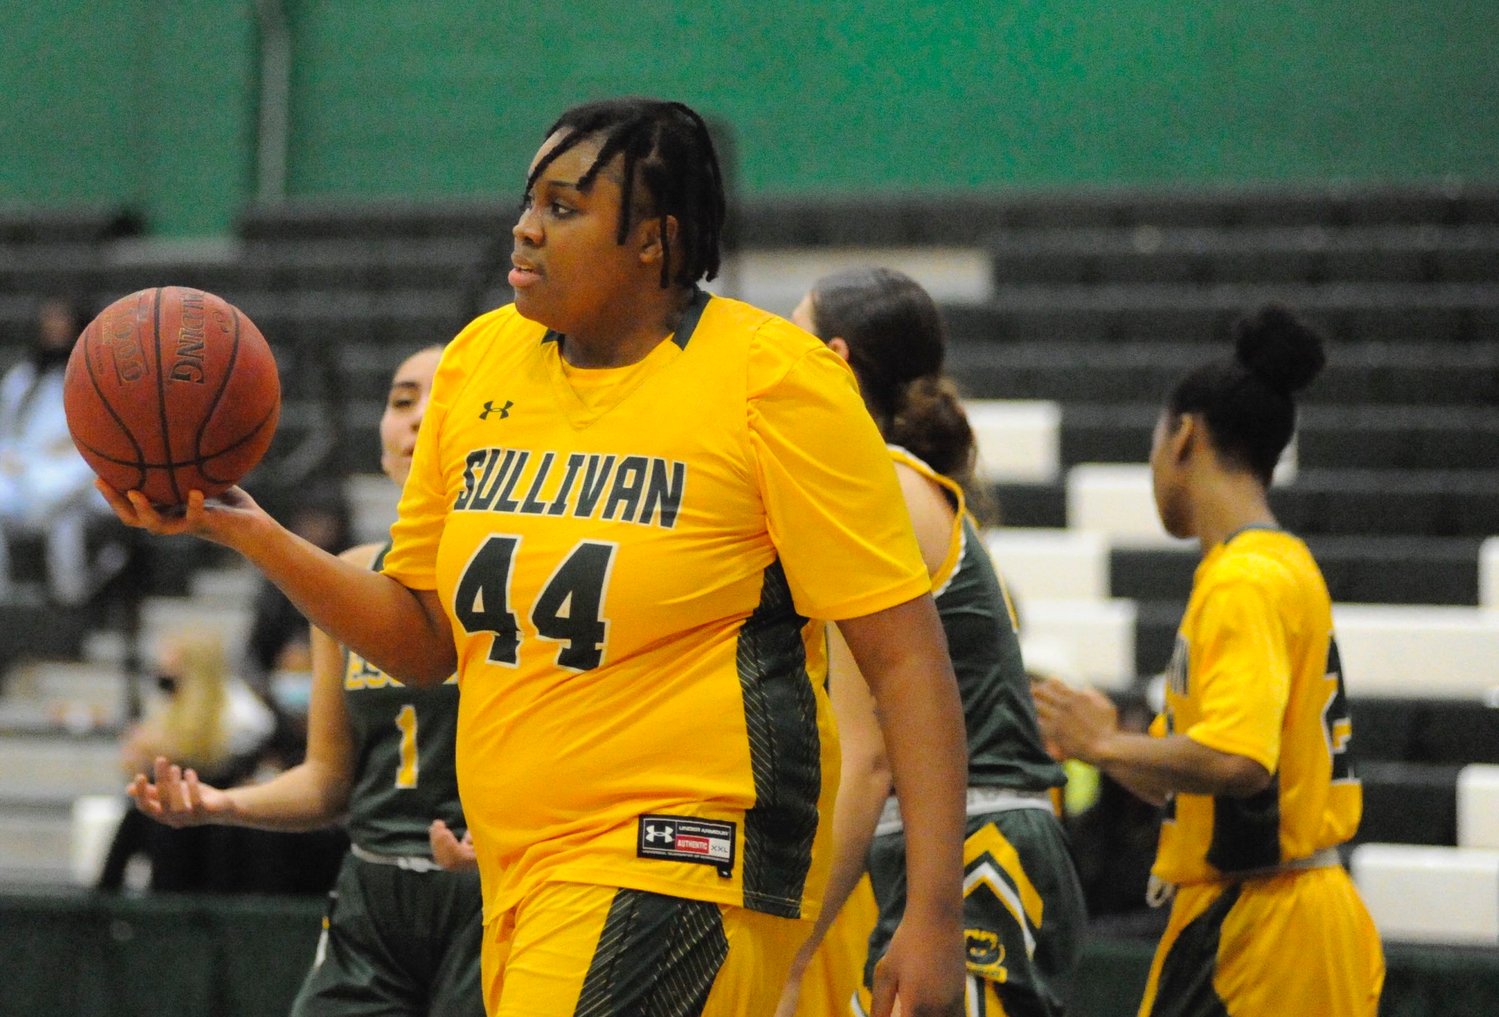 Top gun for SUNY Sullivan. Deivejon Harris scored 18 points. The 6-foot-2-inch freshman center attended the Business of Sports School in the Bronx.